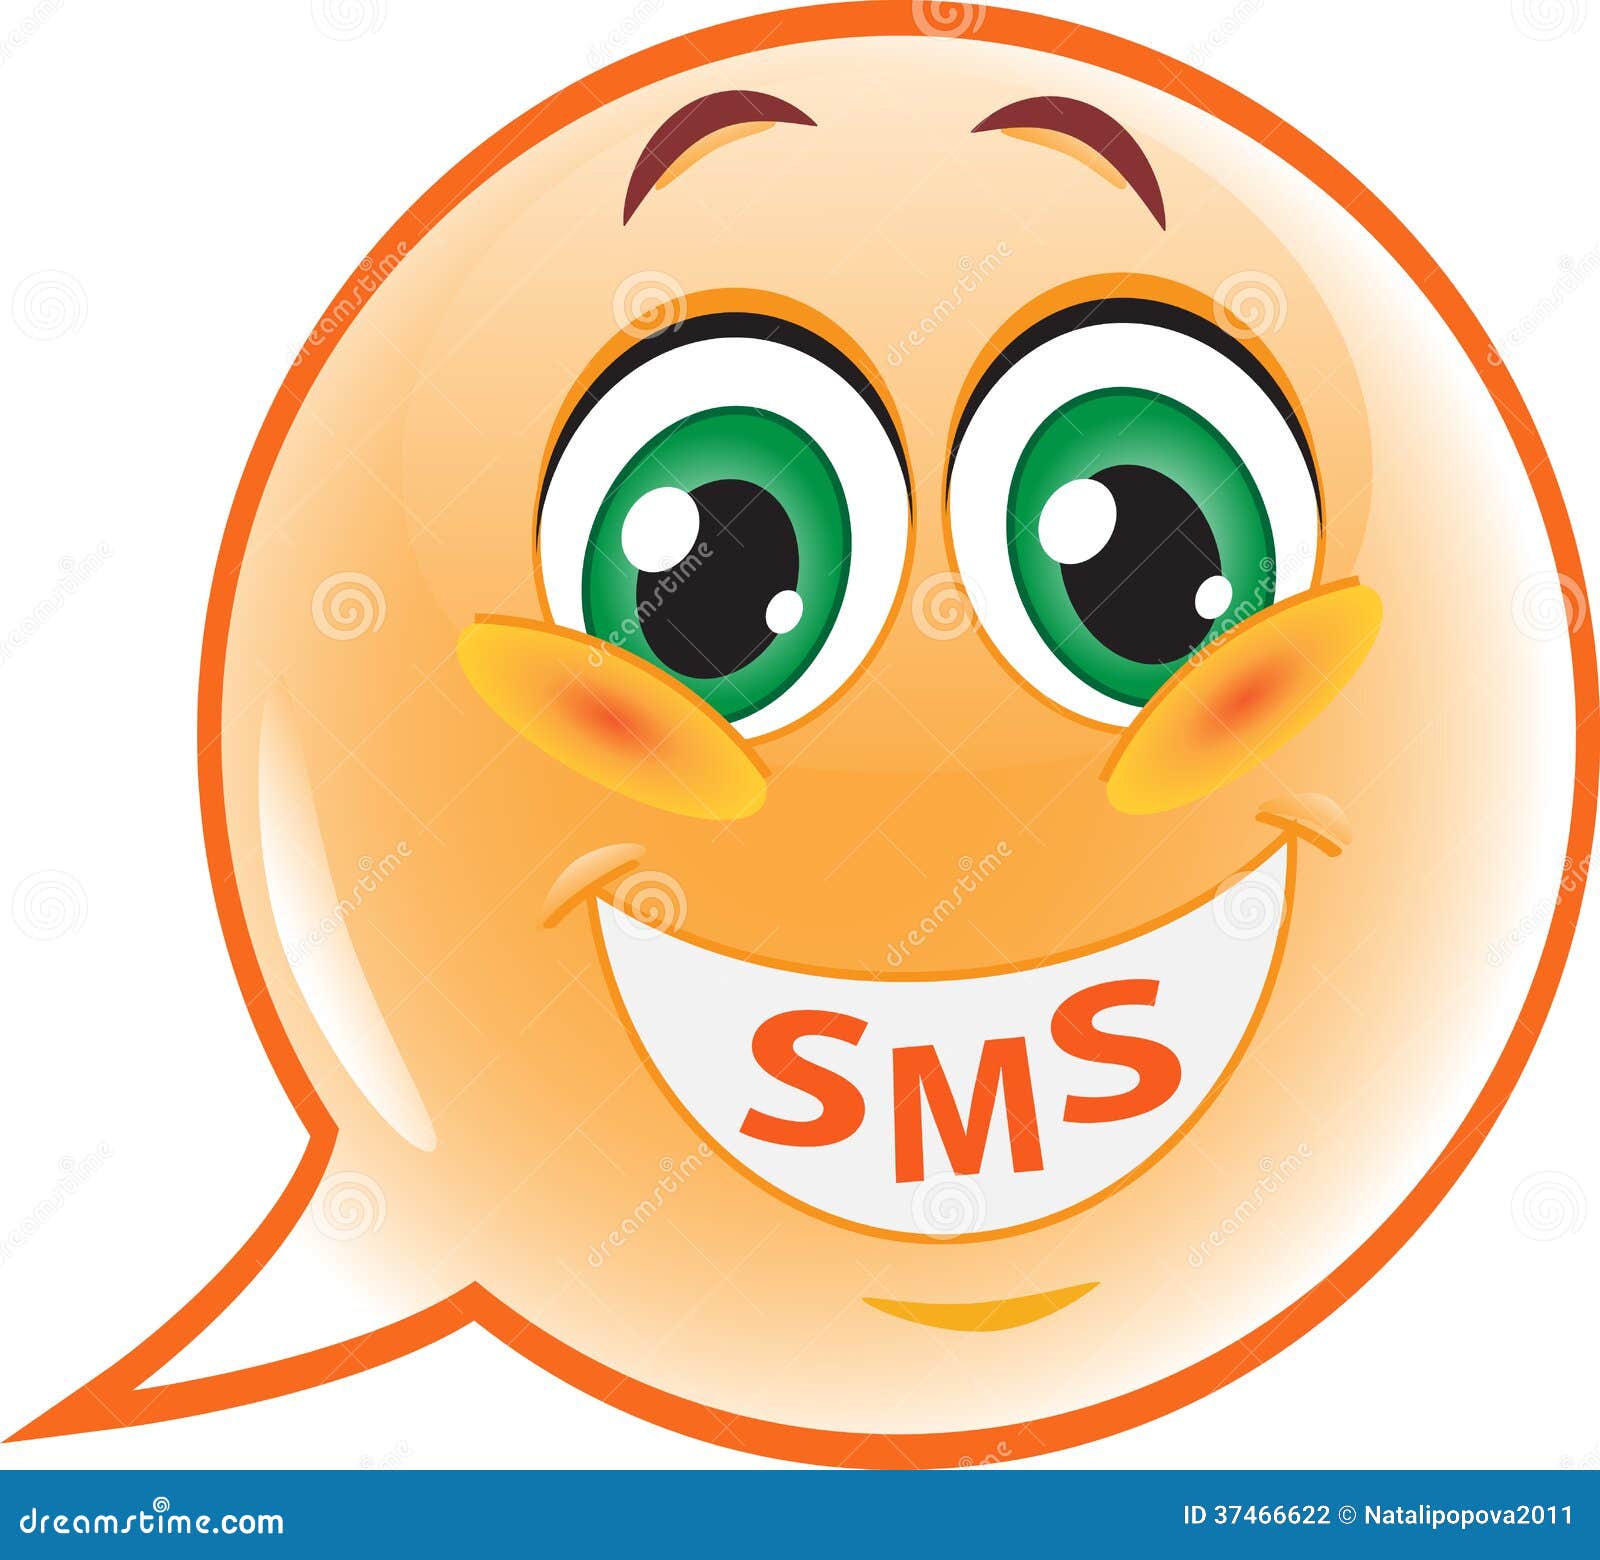 Funny Sms Smile Speech Bubble Stock Vector - Illustration of glossy,  character: 37466622